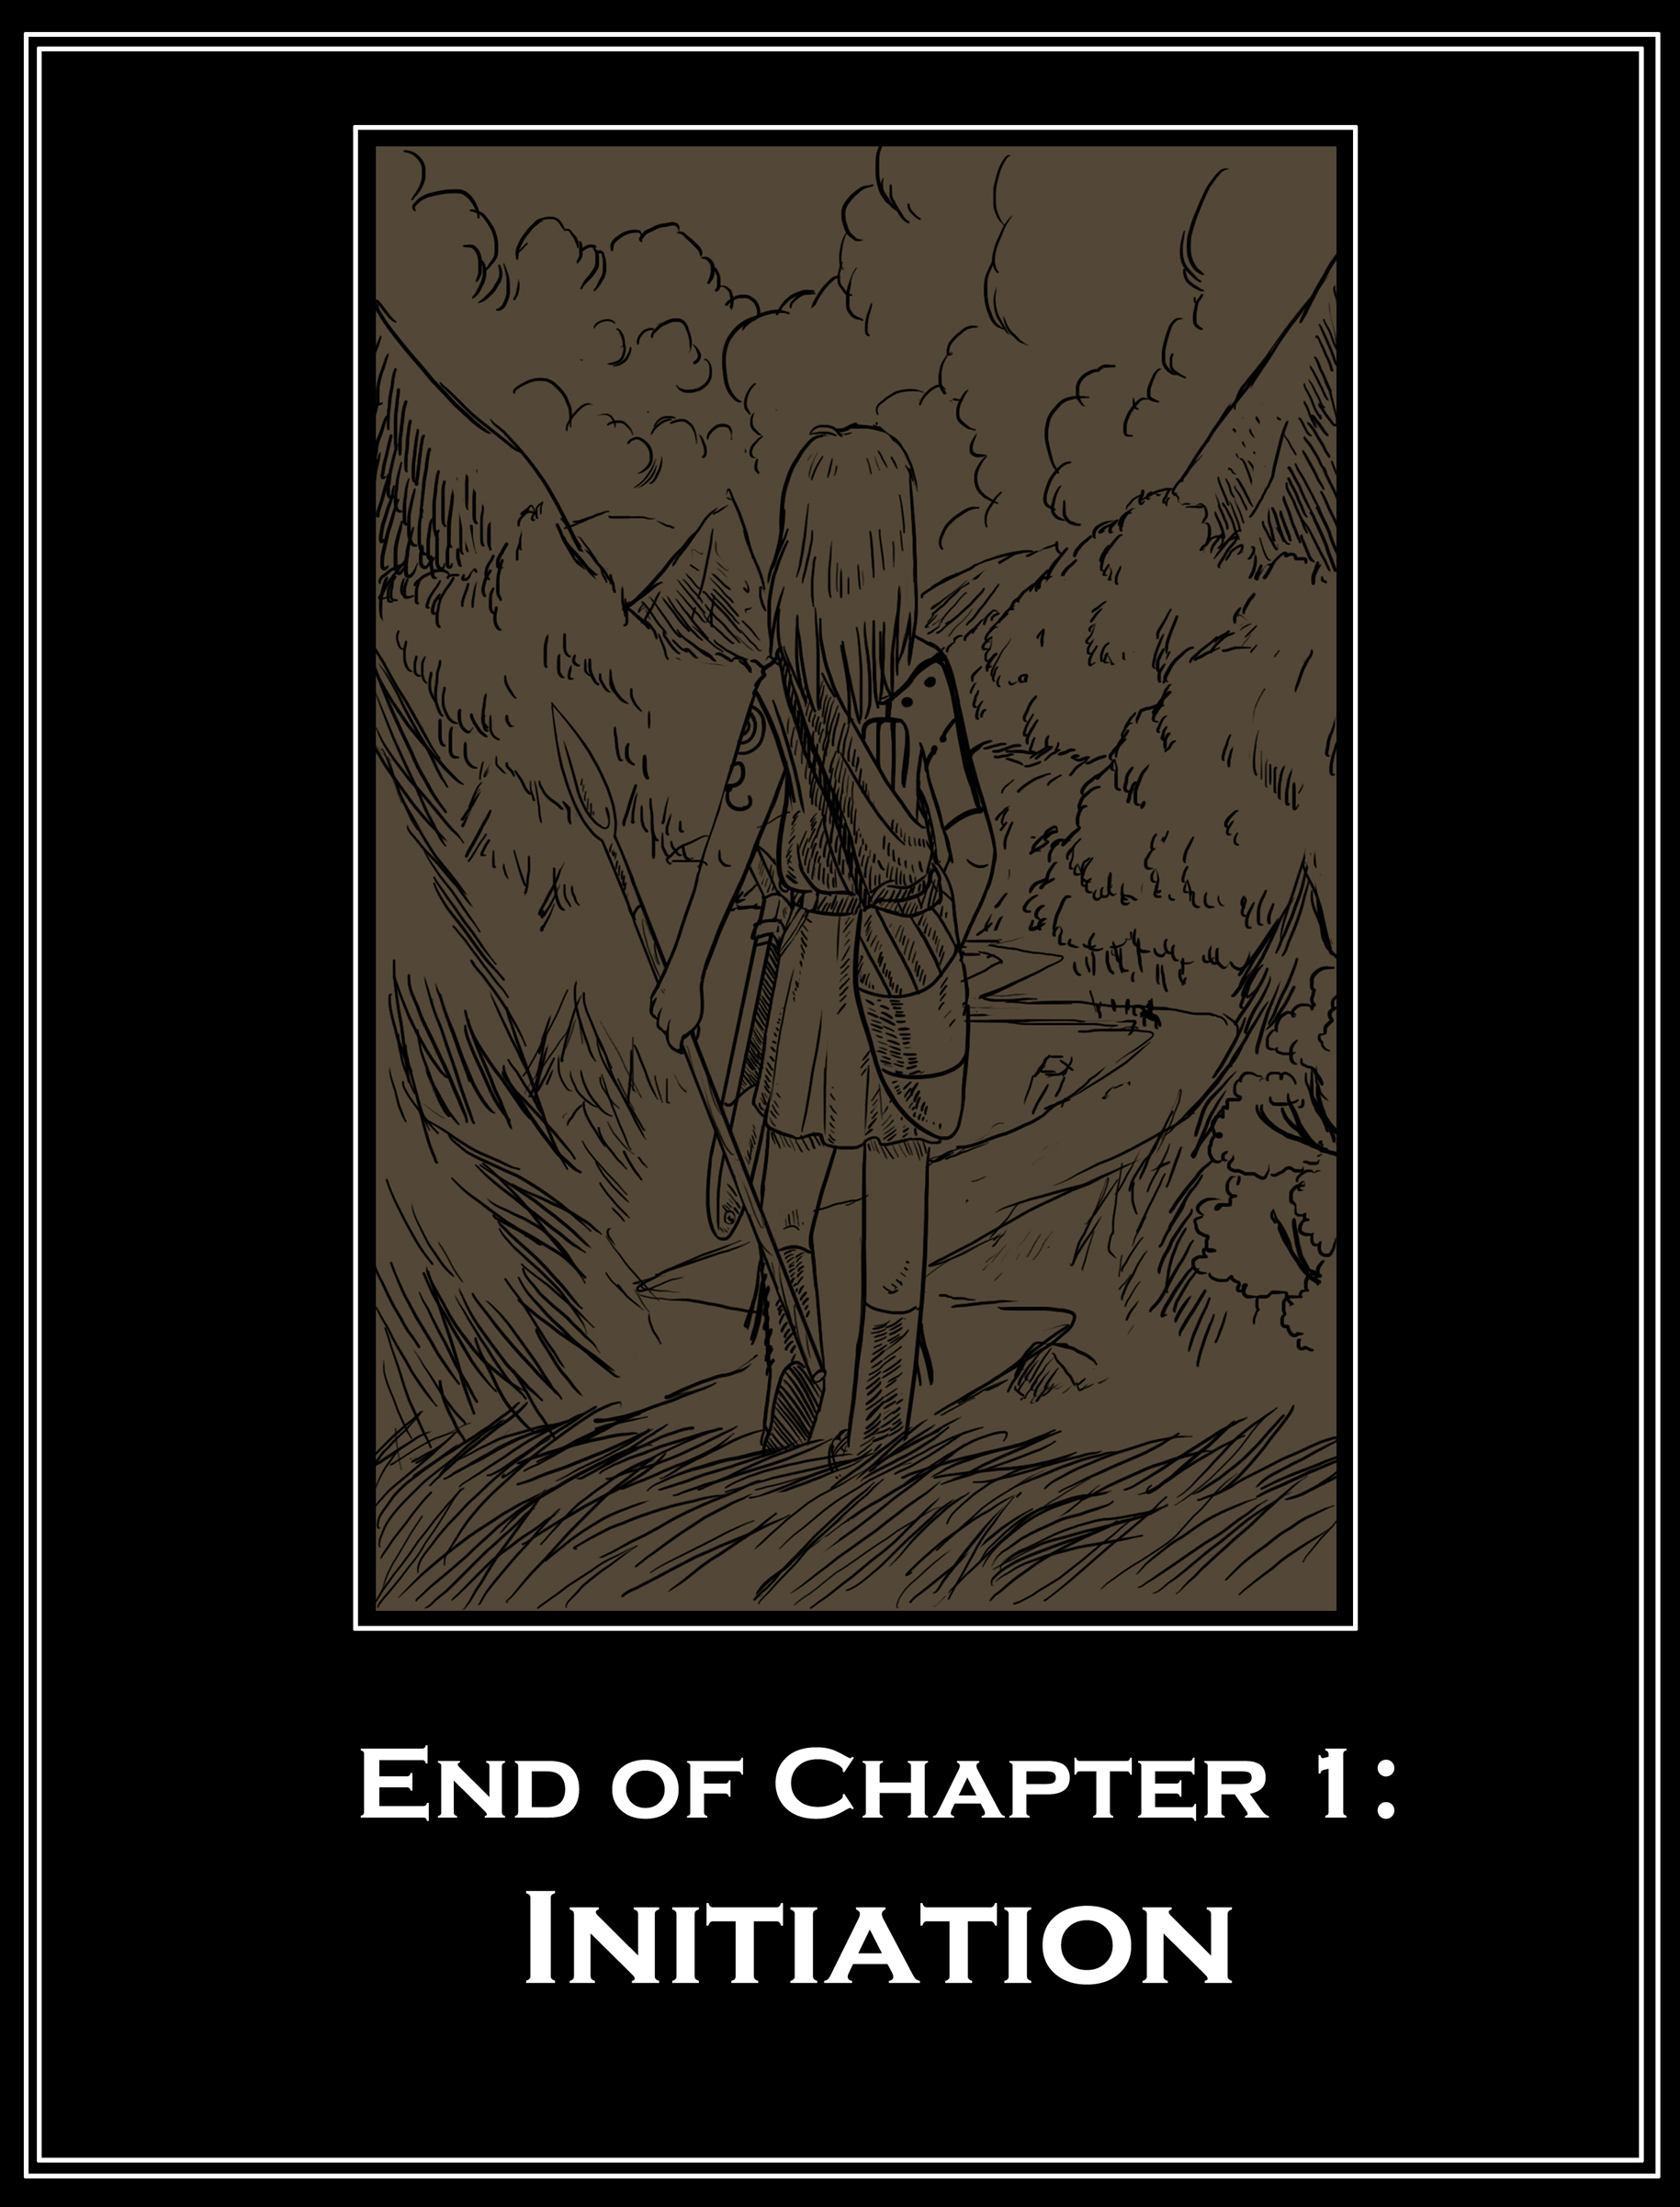 Chapter 1 – End